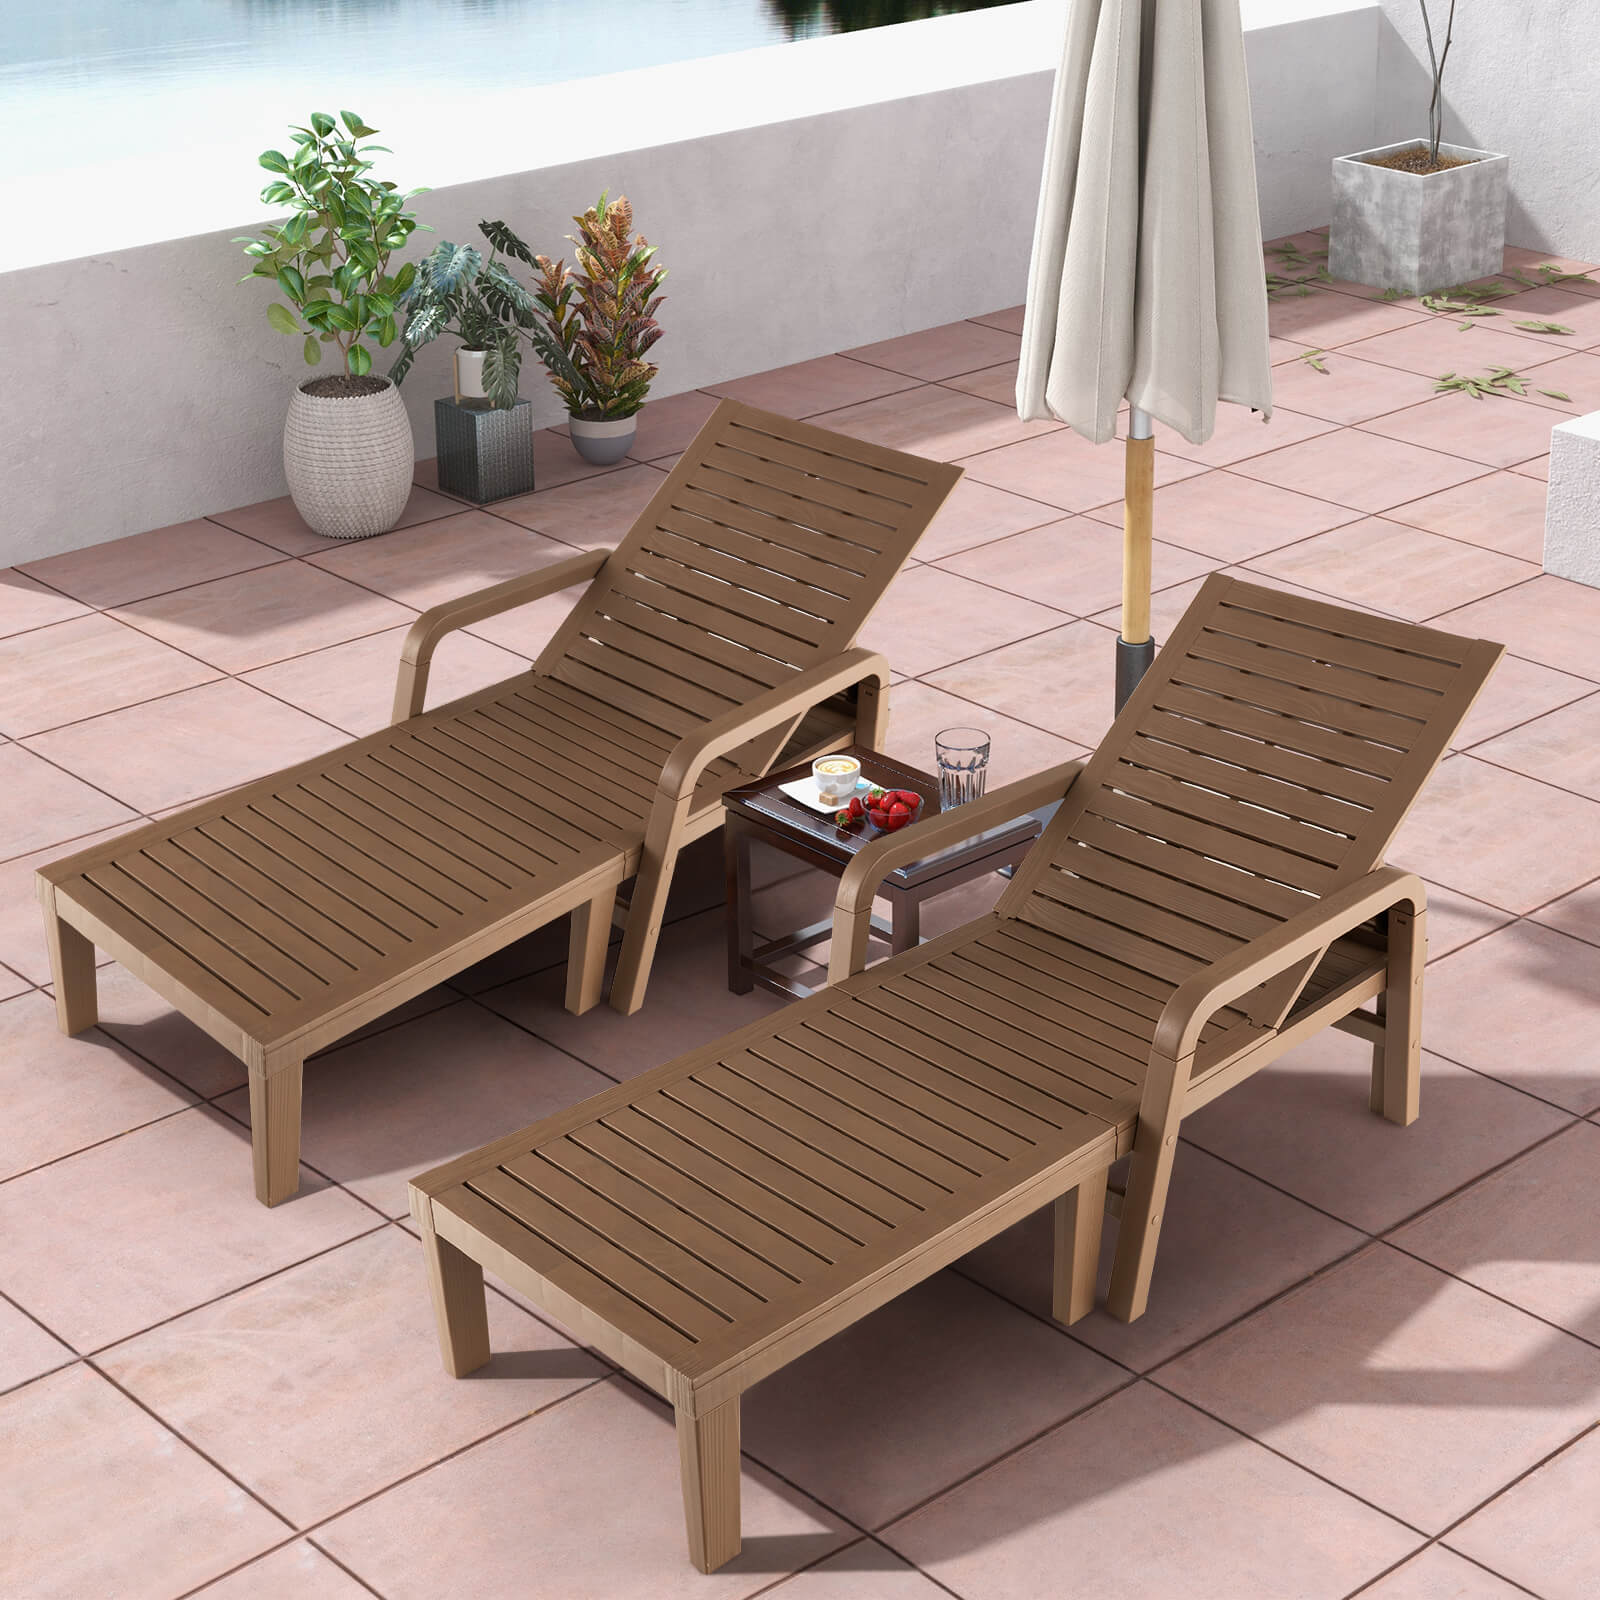 Patio PP Chaise Lounge Chair with 4-Position Adjustable Backrest-Natural